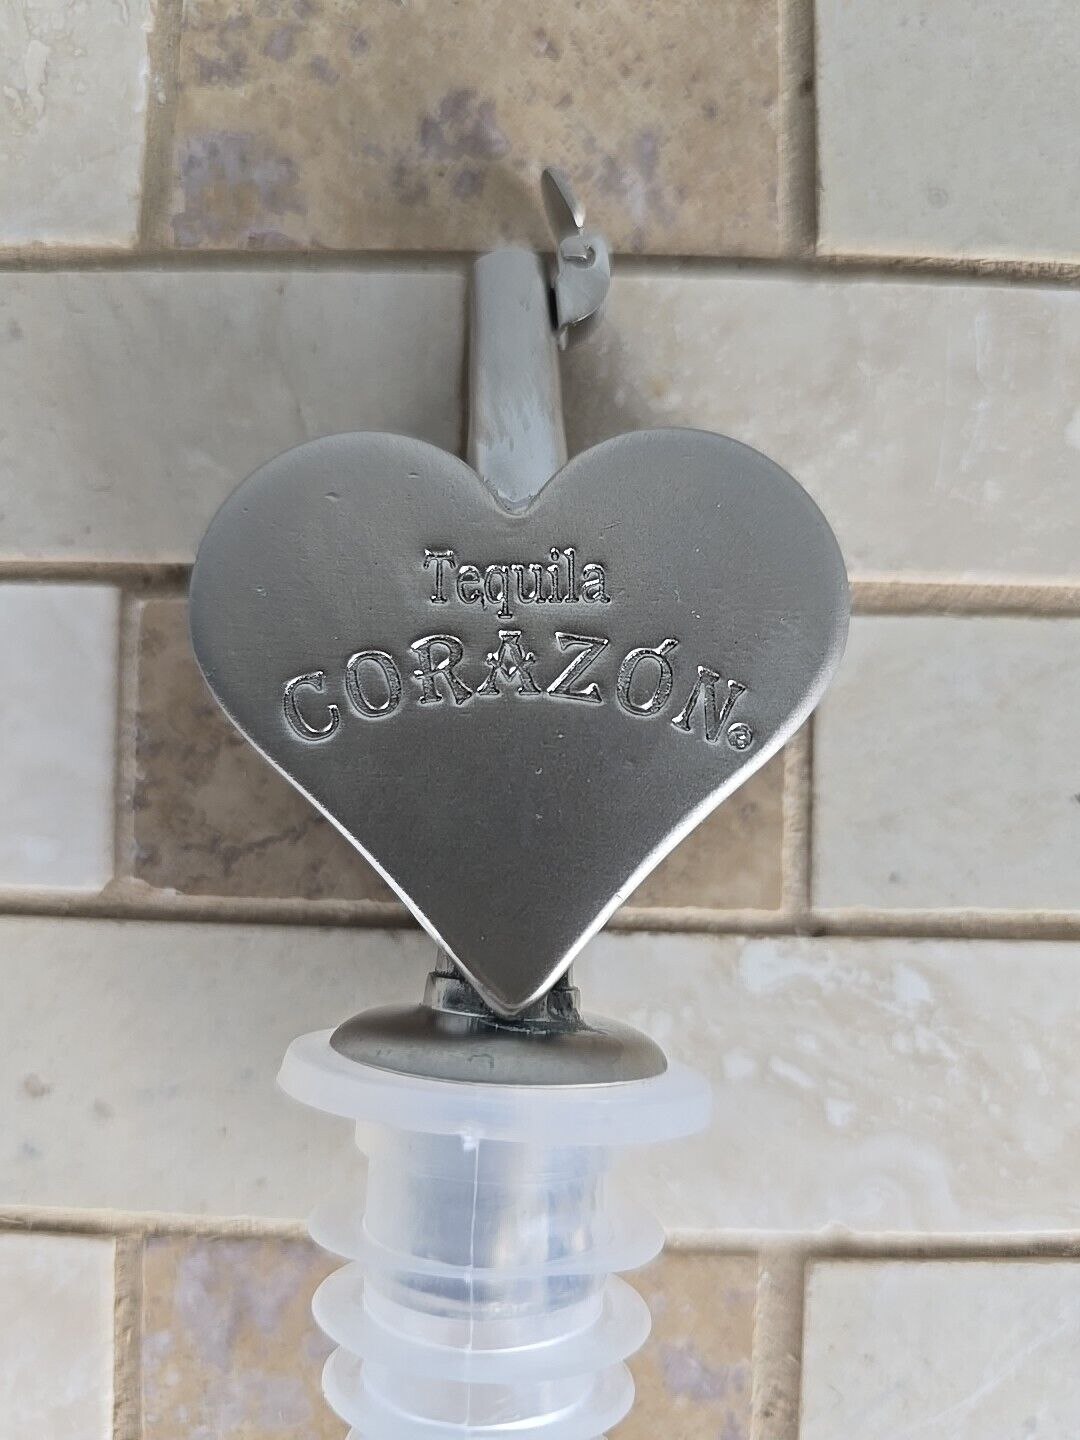 CORAZON Tequila Stainless Steel Alcohol Bottle Pour Spout bar ware new